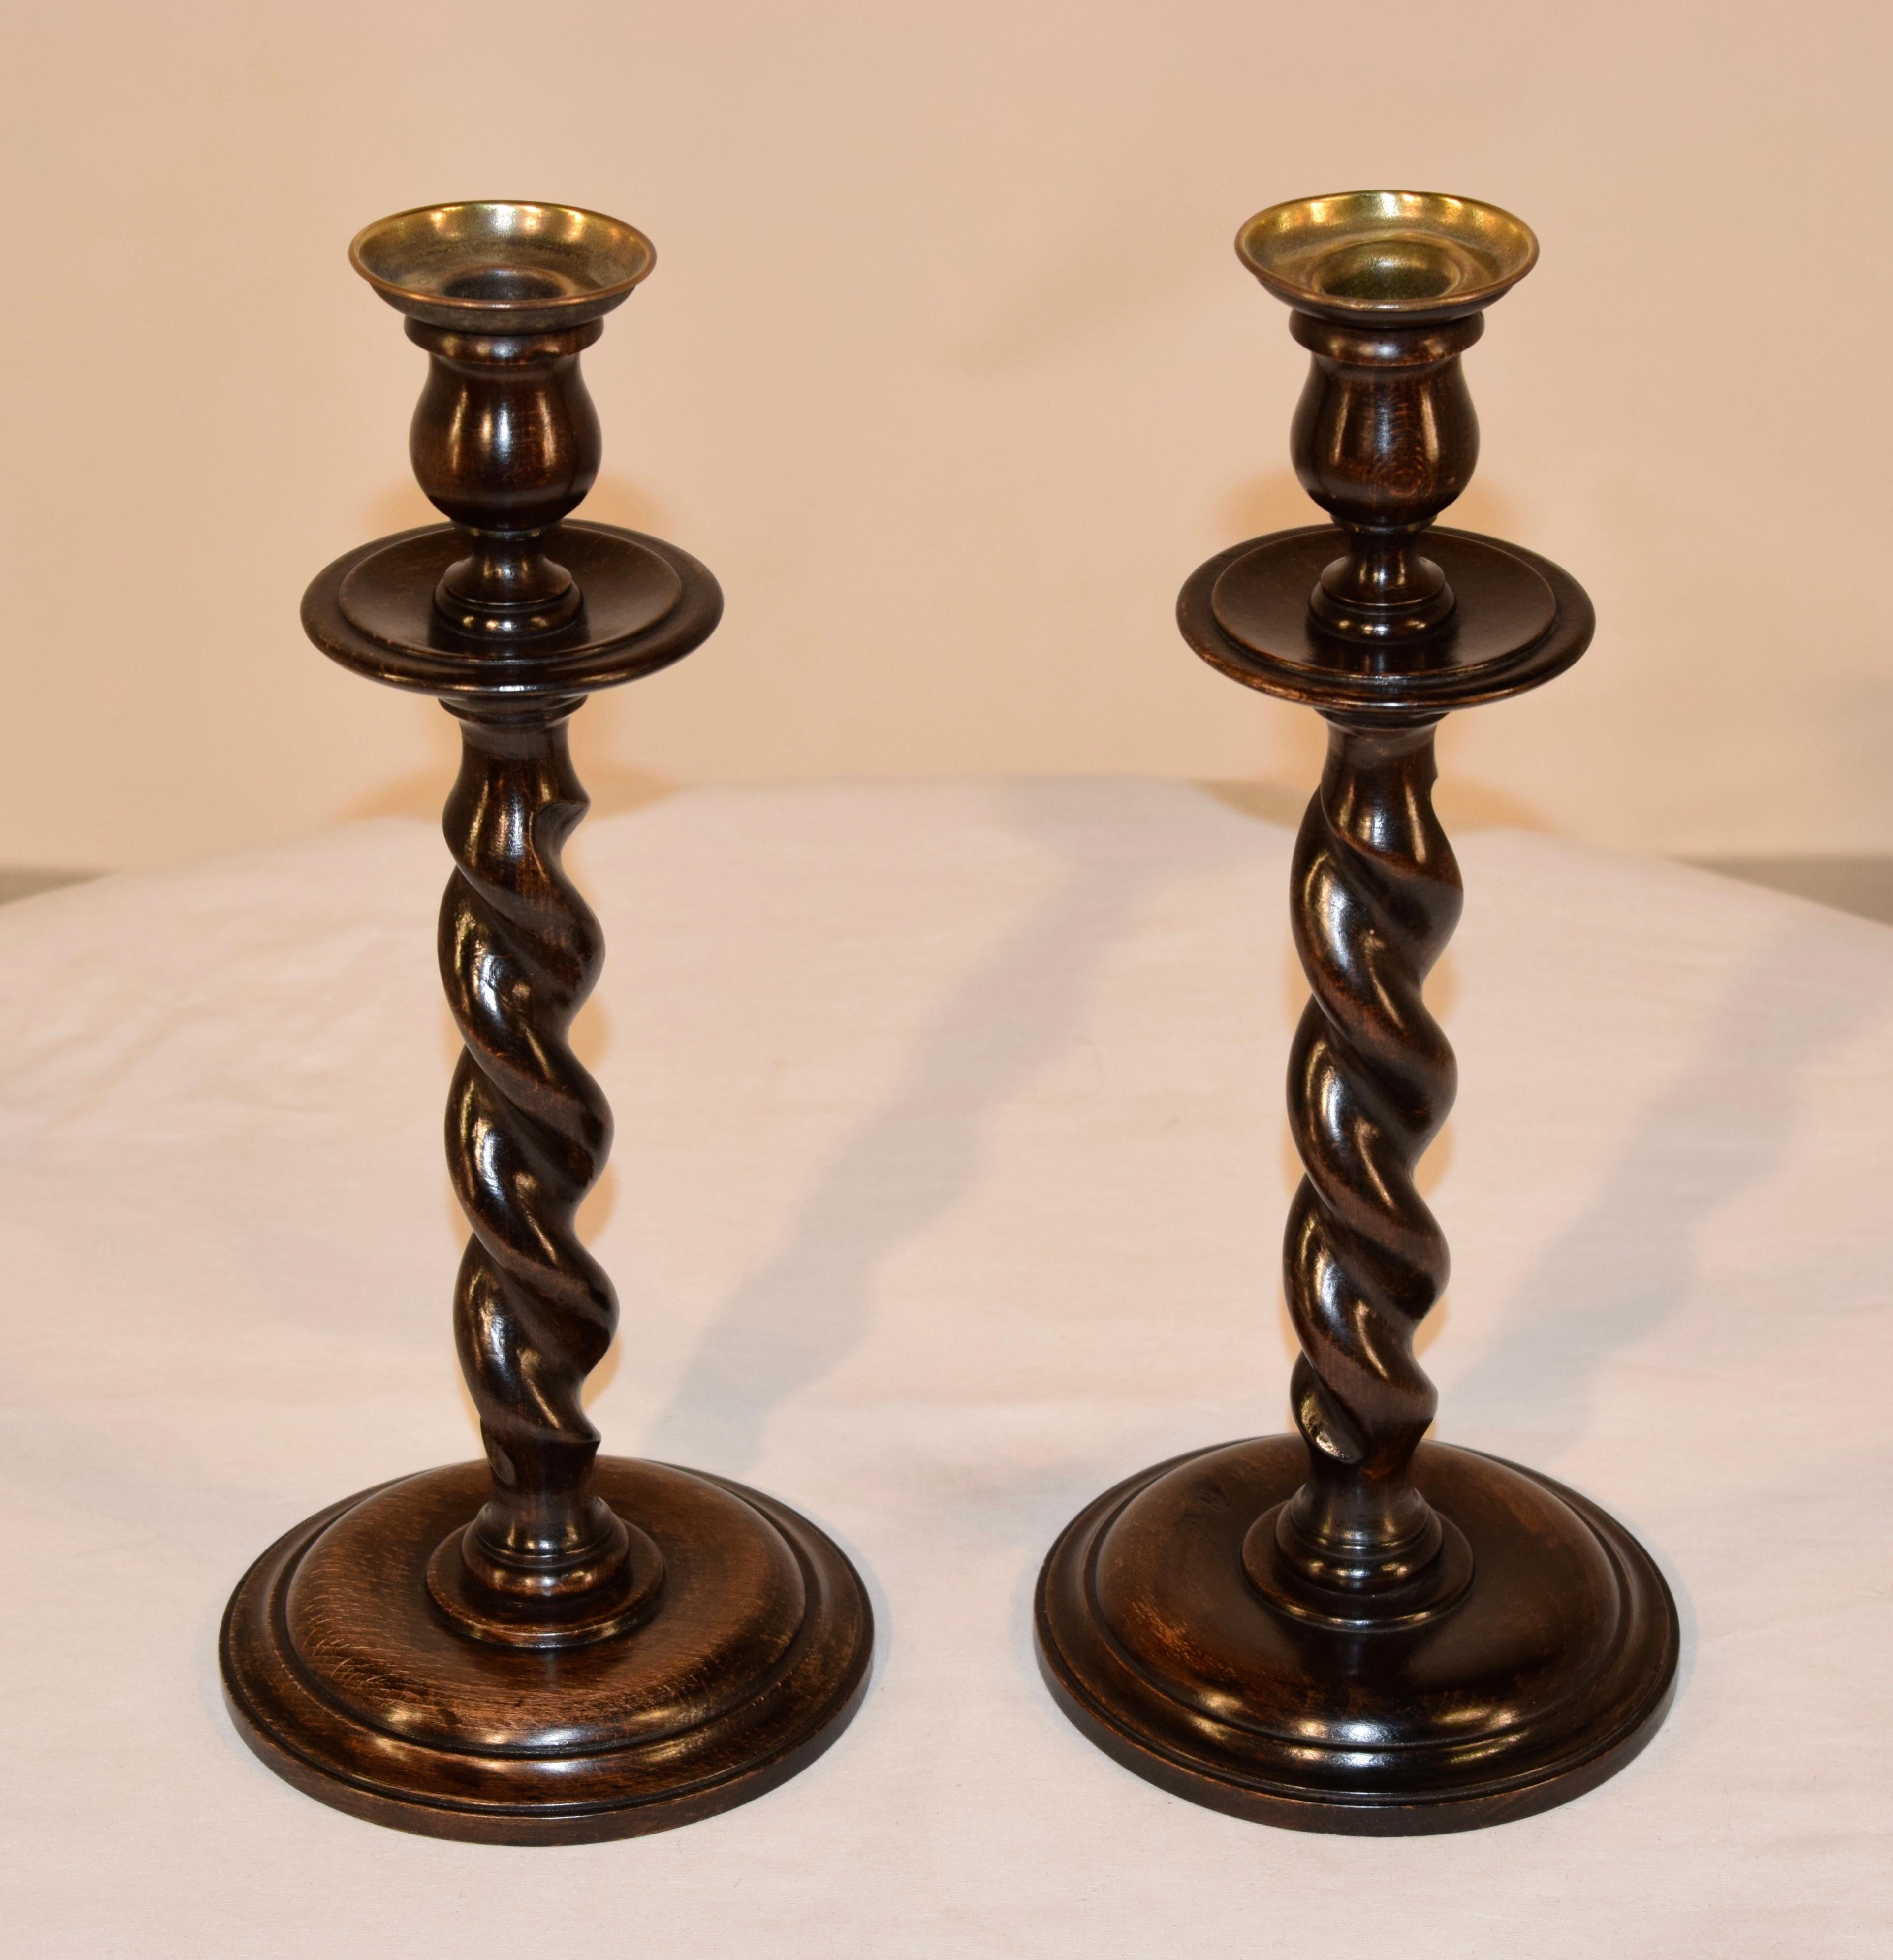 Pair of 19th century English oak candlesticks with hand-turned brass inserts and tulip shaped candle cups over hand-turned oak bobeches and hand-turned barley twist stems over hand-turned molded bases.